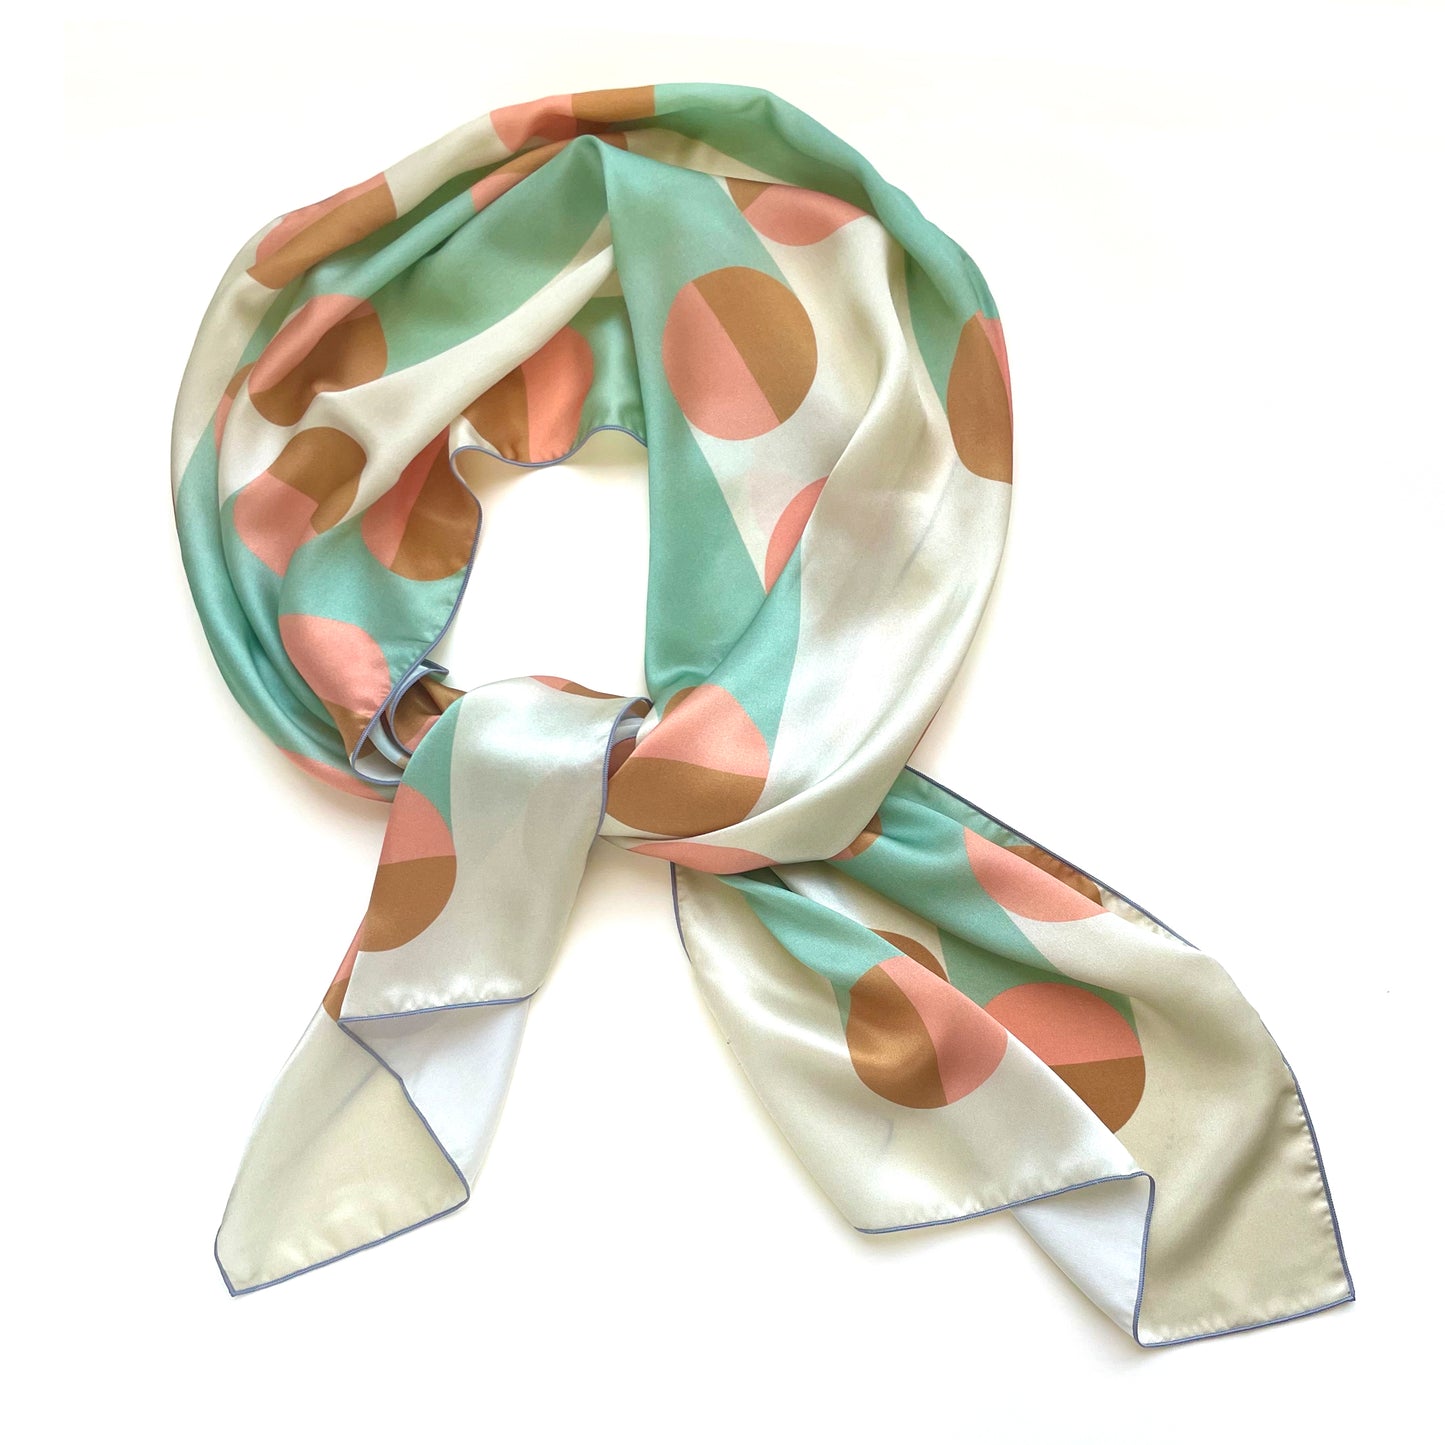 Art deco inspired geometric print on a long silk scarf in subtle pastels: pink, grey, and gold.